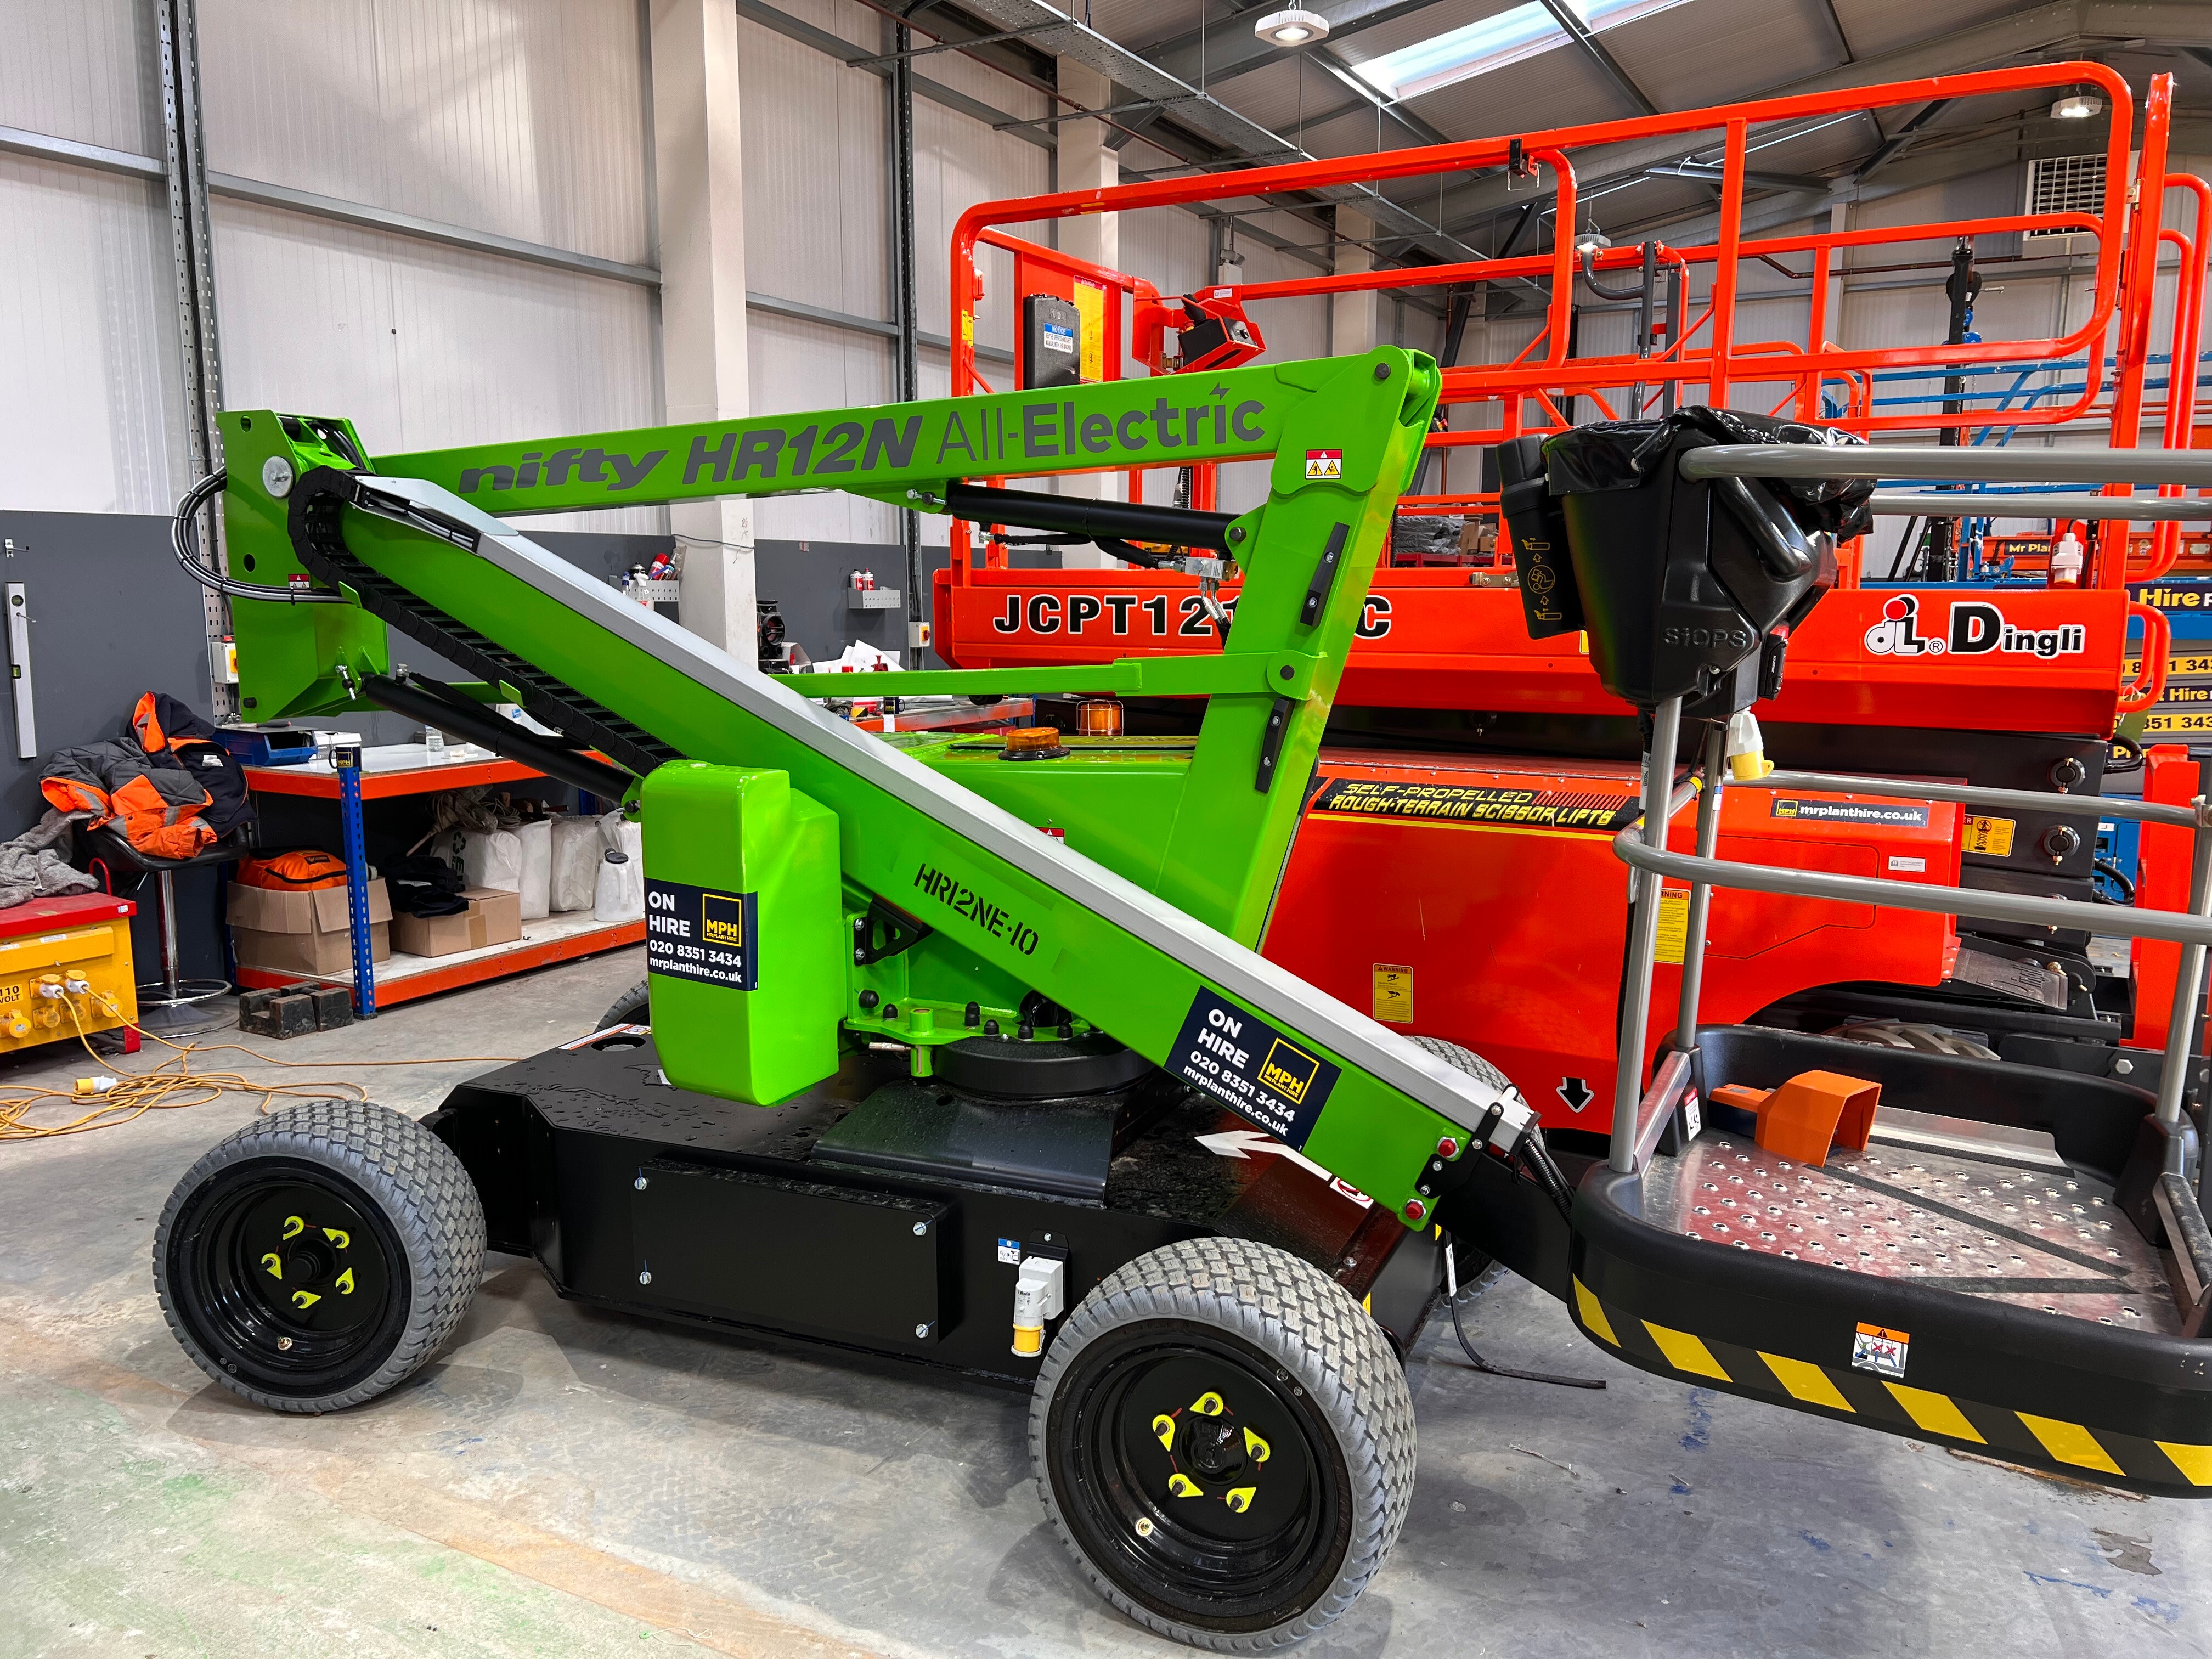 Narrow Electric Boom Lift | Niftylift HR12NE | Mr Plant Hire | Electric  Boom Lifts | Powered Access